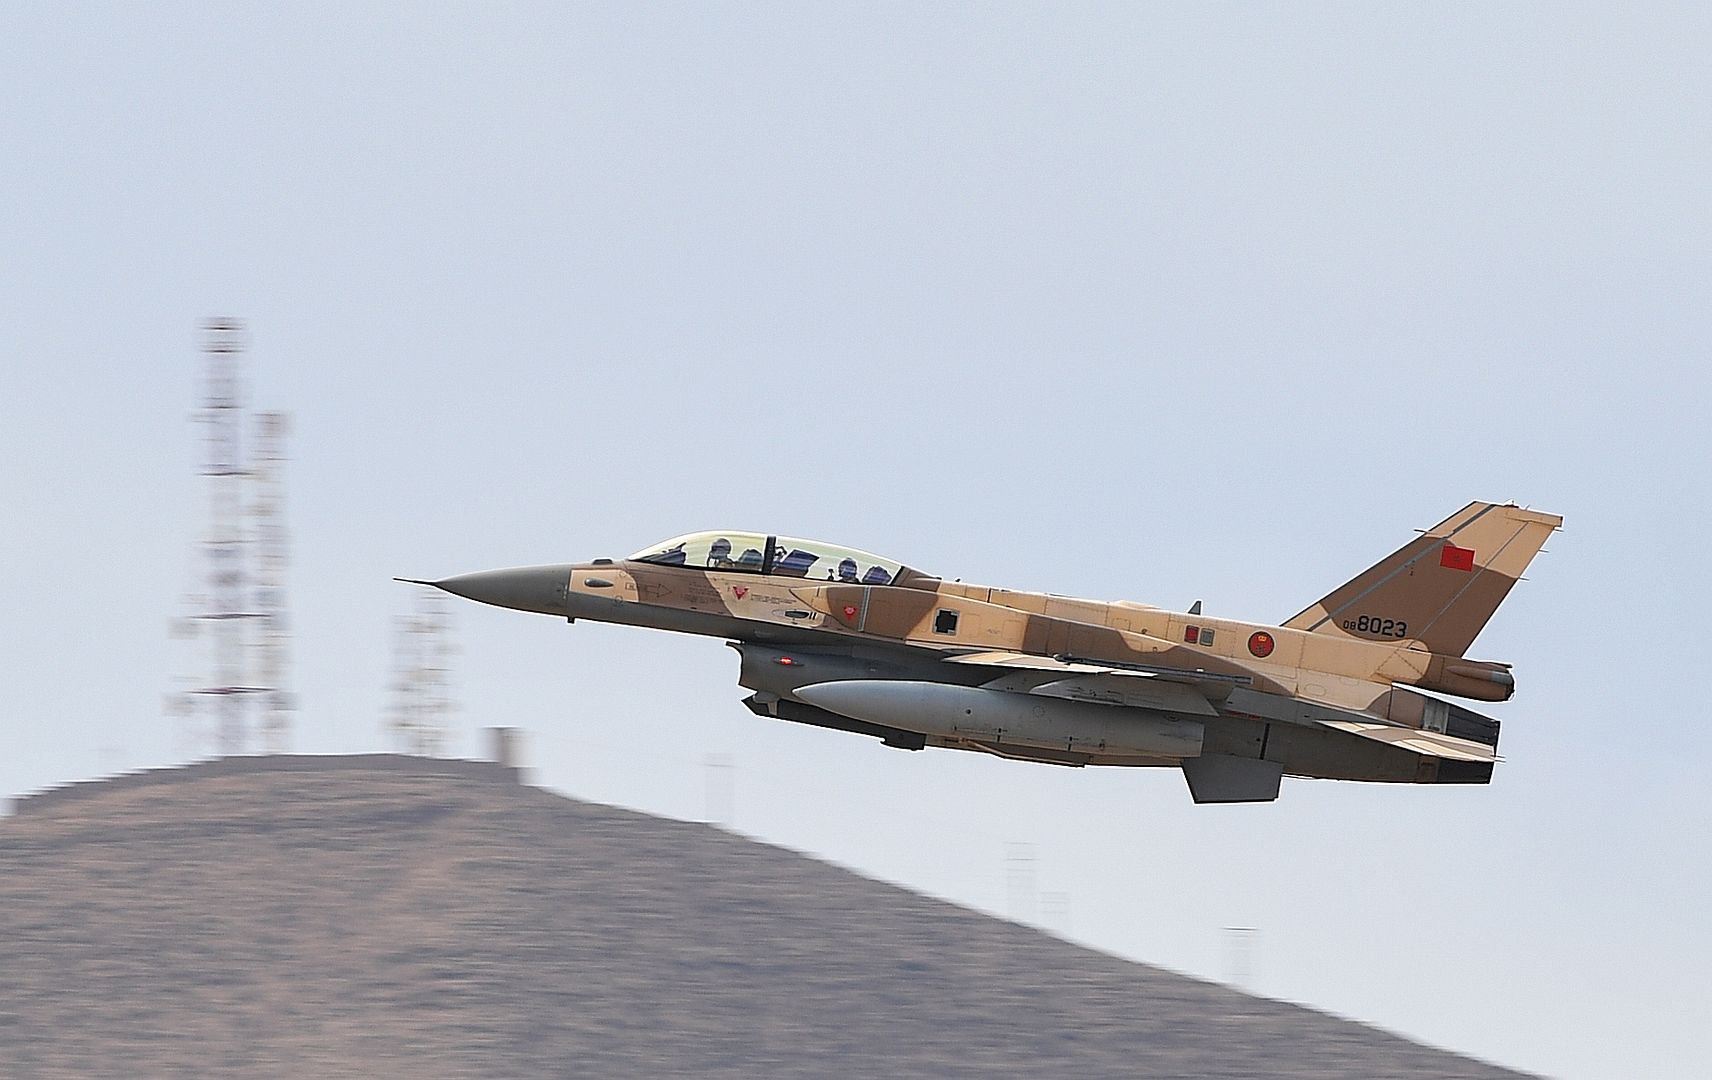 16 Fighting Falcon Takes Off During Exercise African Lion 21 On Ben Guerir Air Base Morocco 16 June 2021